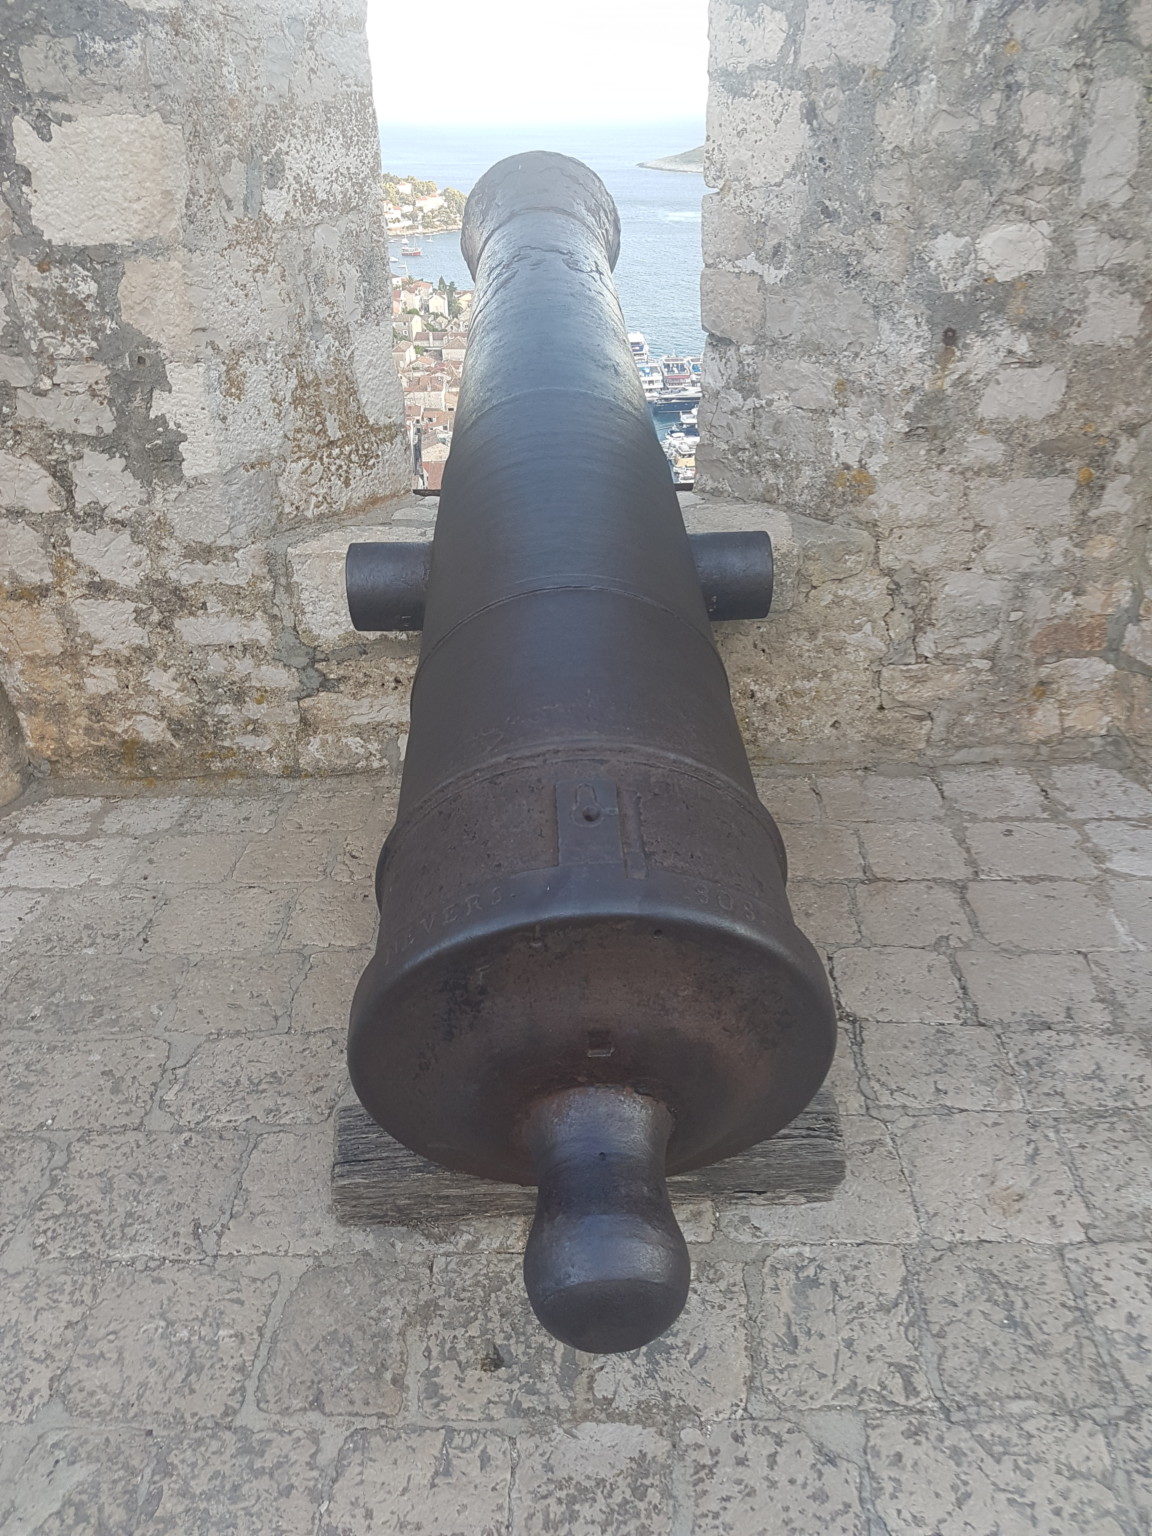 I Rode on this Cannon